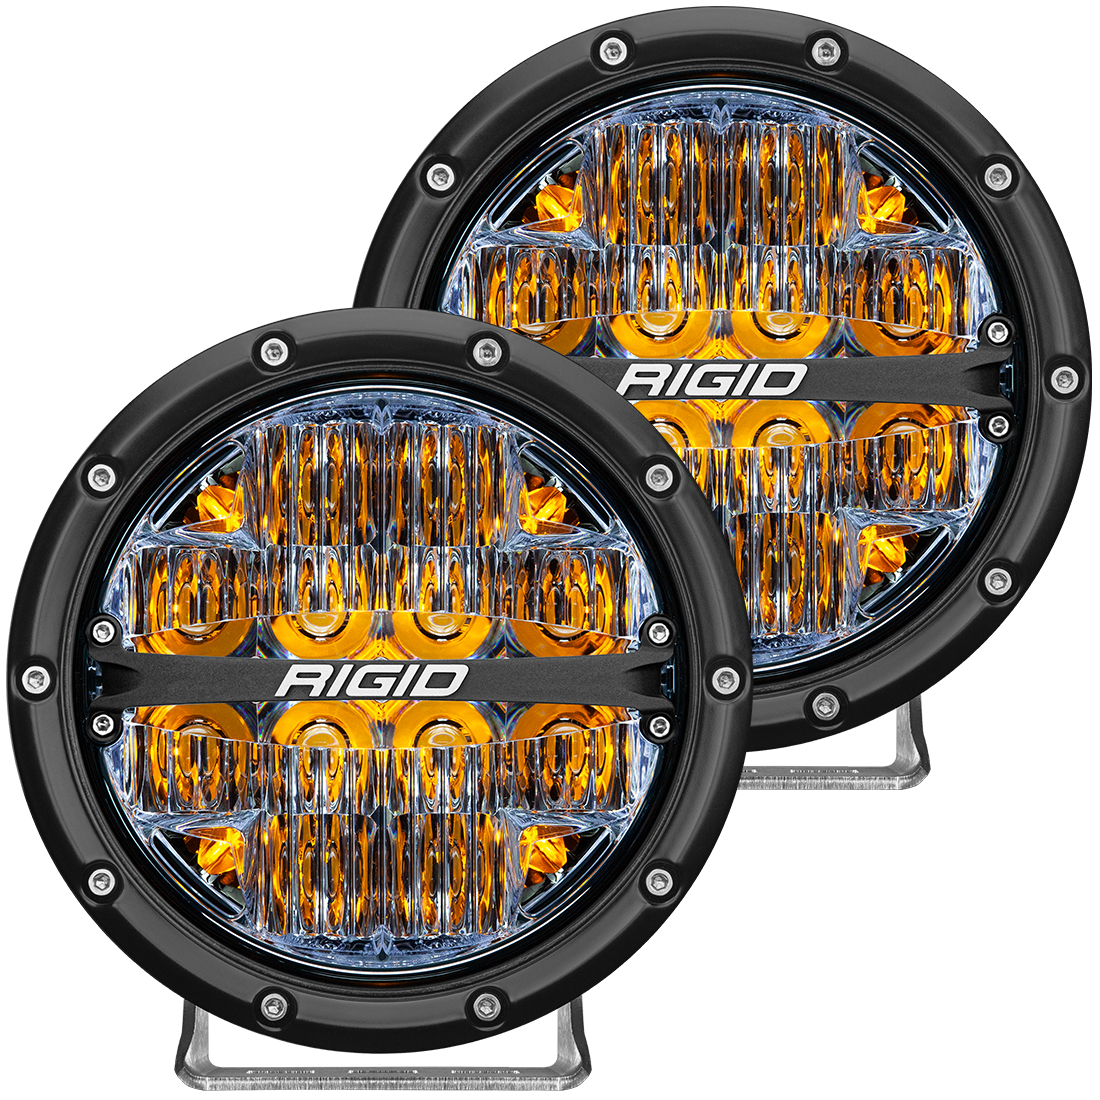 Rigid Industries 360-Series 6 Inch Led Off-Road Drive Beam Amber Backlight Pair